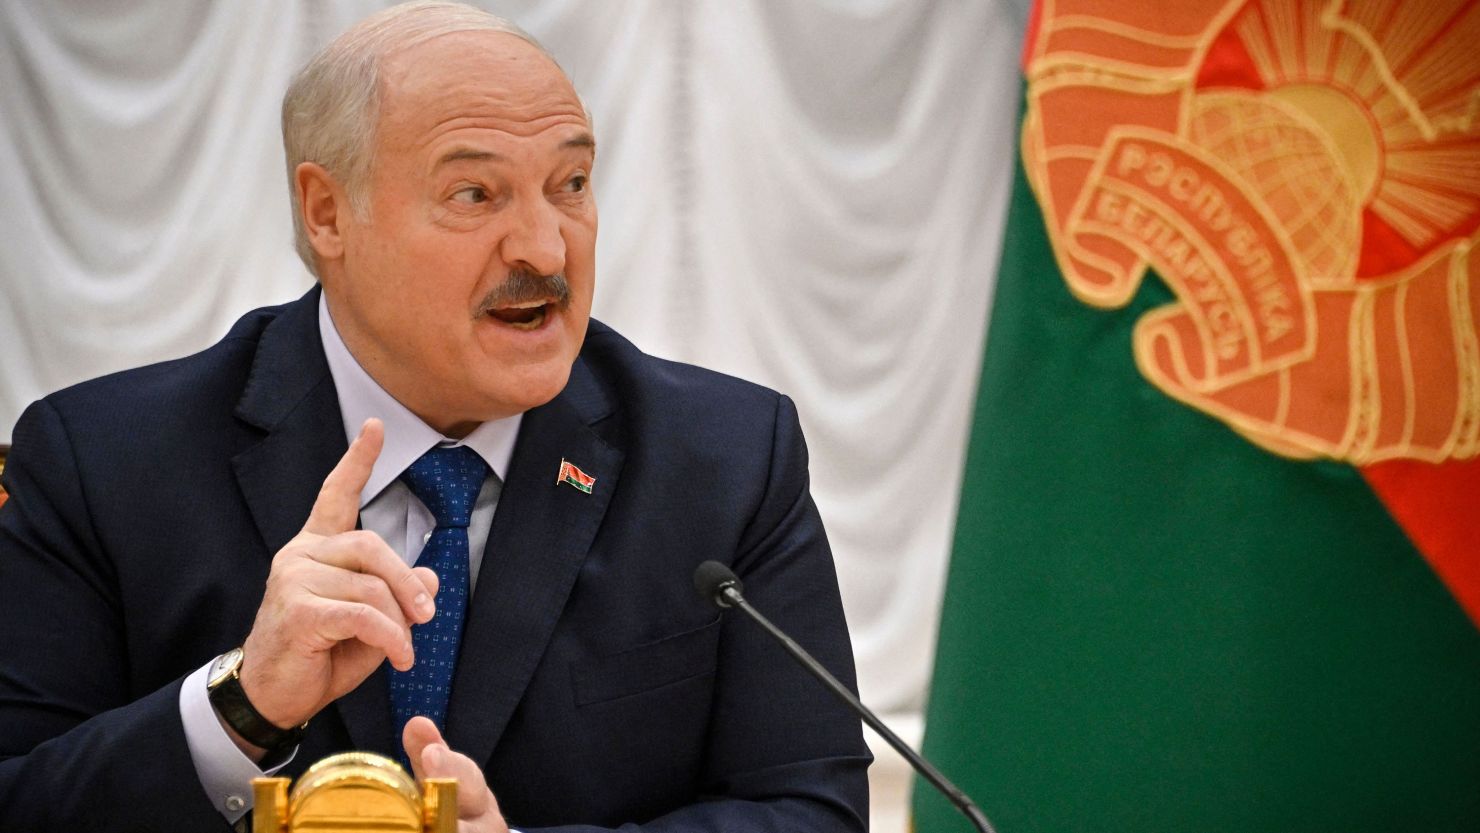 Lukashenko, pictured here in July 2023, may have muddied Putin's claims that Ukraine was involved in the attack on a Moscow concert hall.